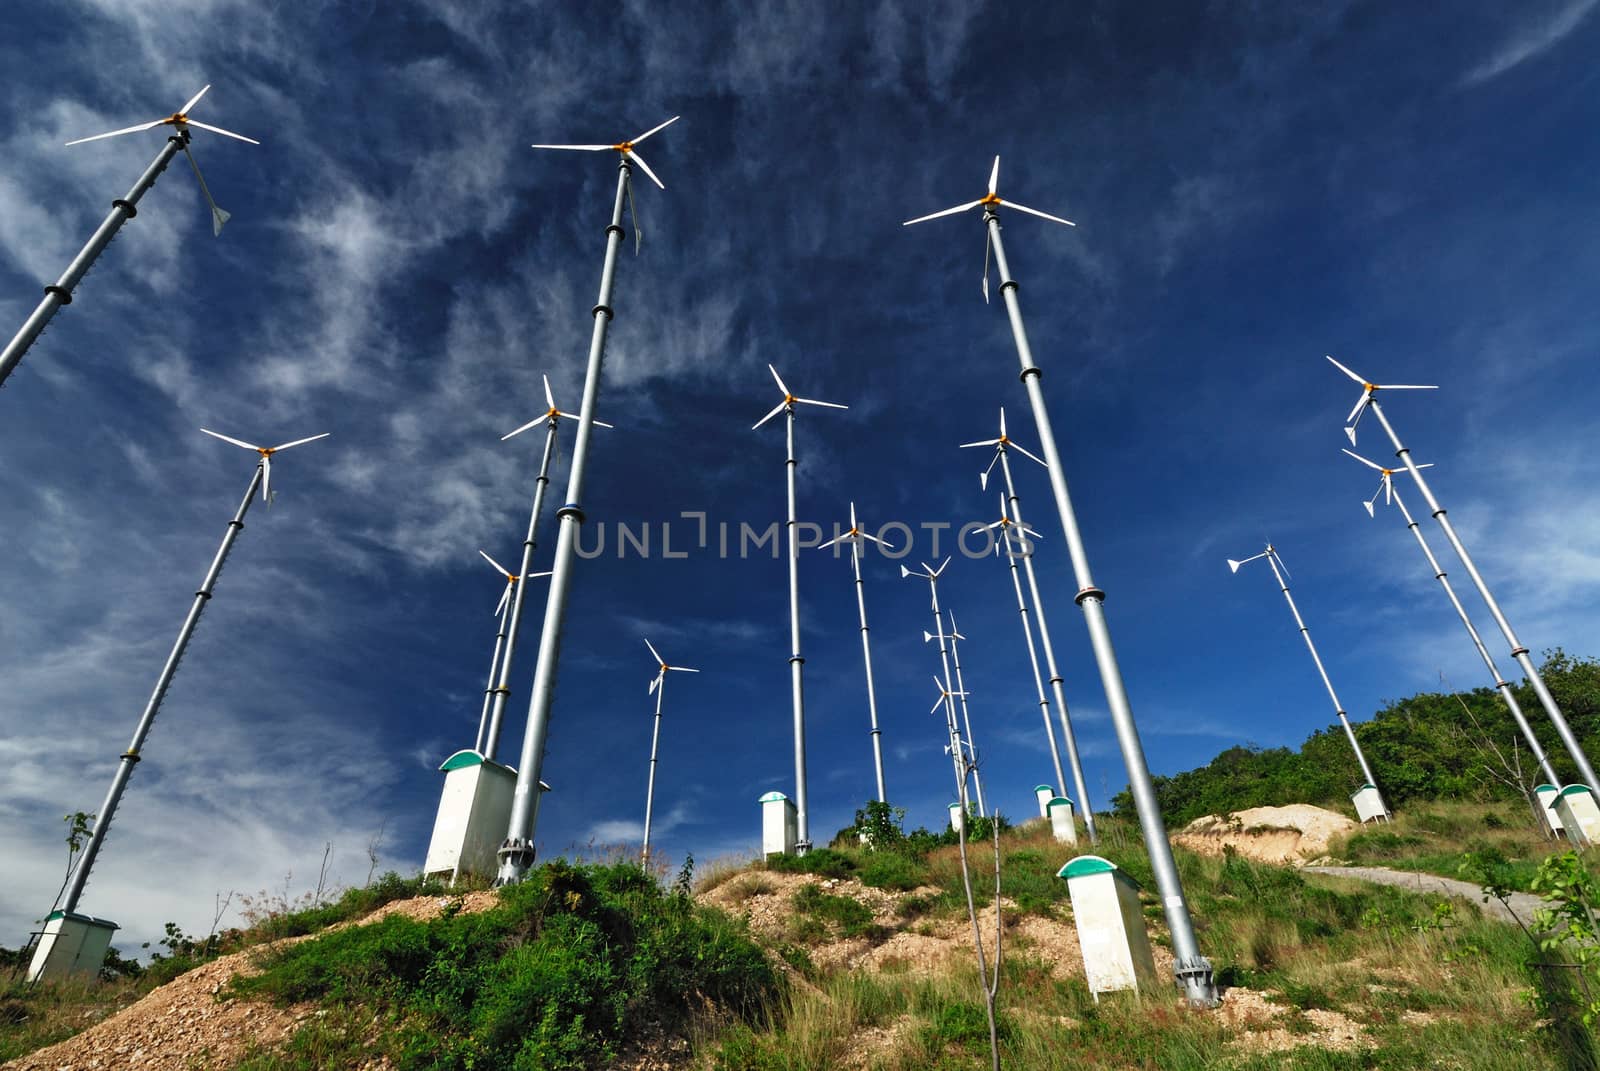 Wind mill power plant on Larn island,Pattaya city,Thailand by think4photop